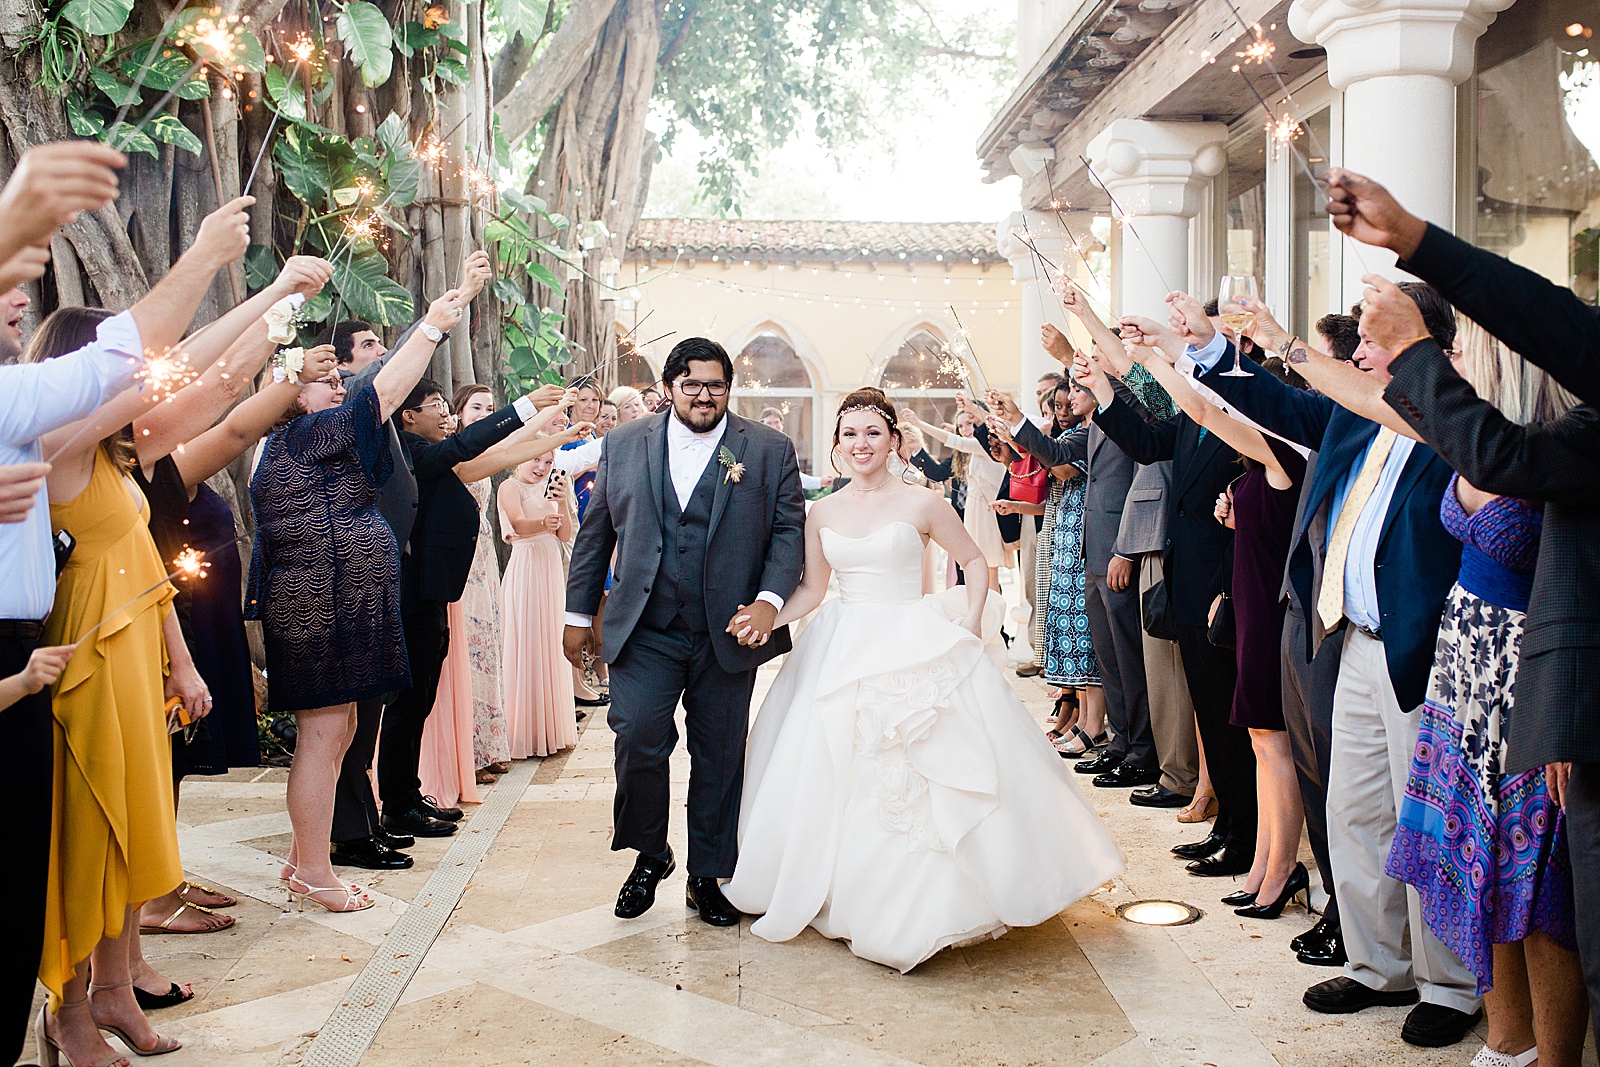 Bride and Groom sparkler exit at The Addison designed by NYC Wedding Planner, Poppy + Lynn